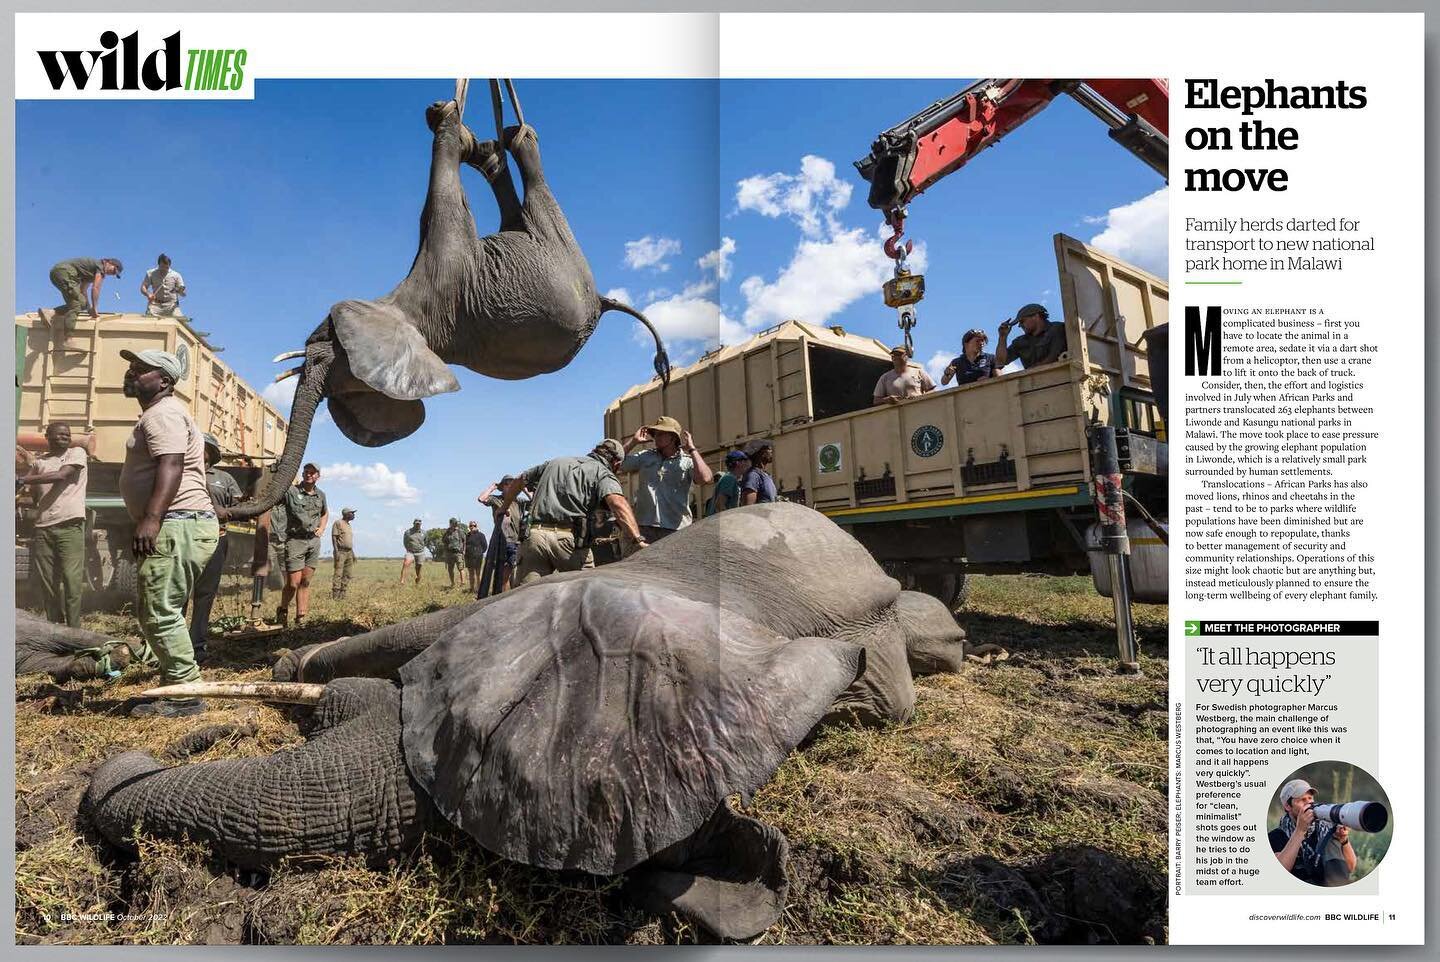 Photographing the elephant translocation in Malawi for @africanparksnetwork a few months ago was definitely an interesting assignment. I&rsquo;d call it organized chaos, except it wasn&rsquo;t really chaotic at all, even if it felt that way as a phot